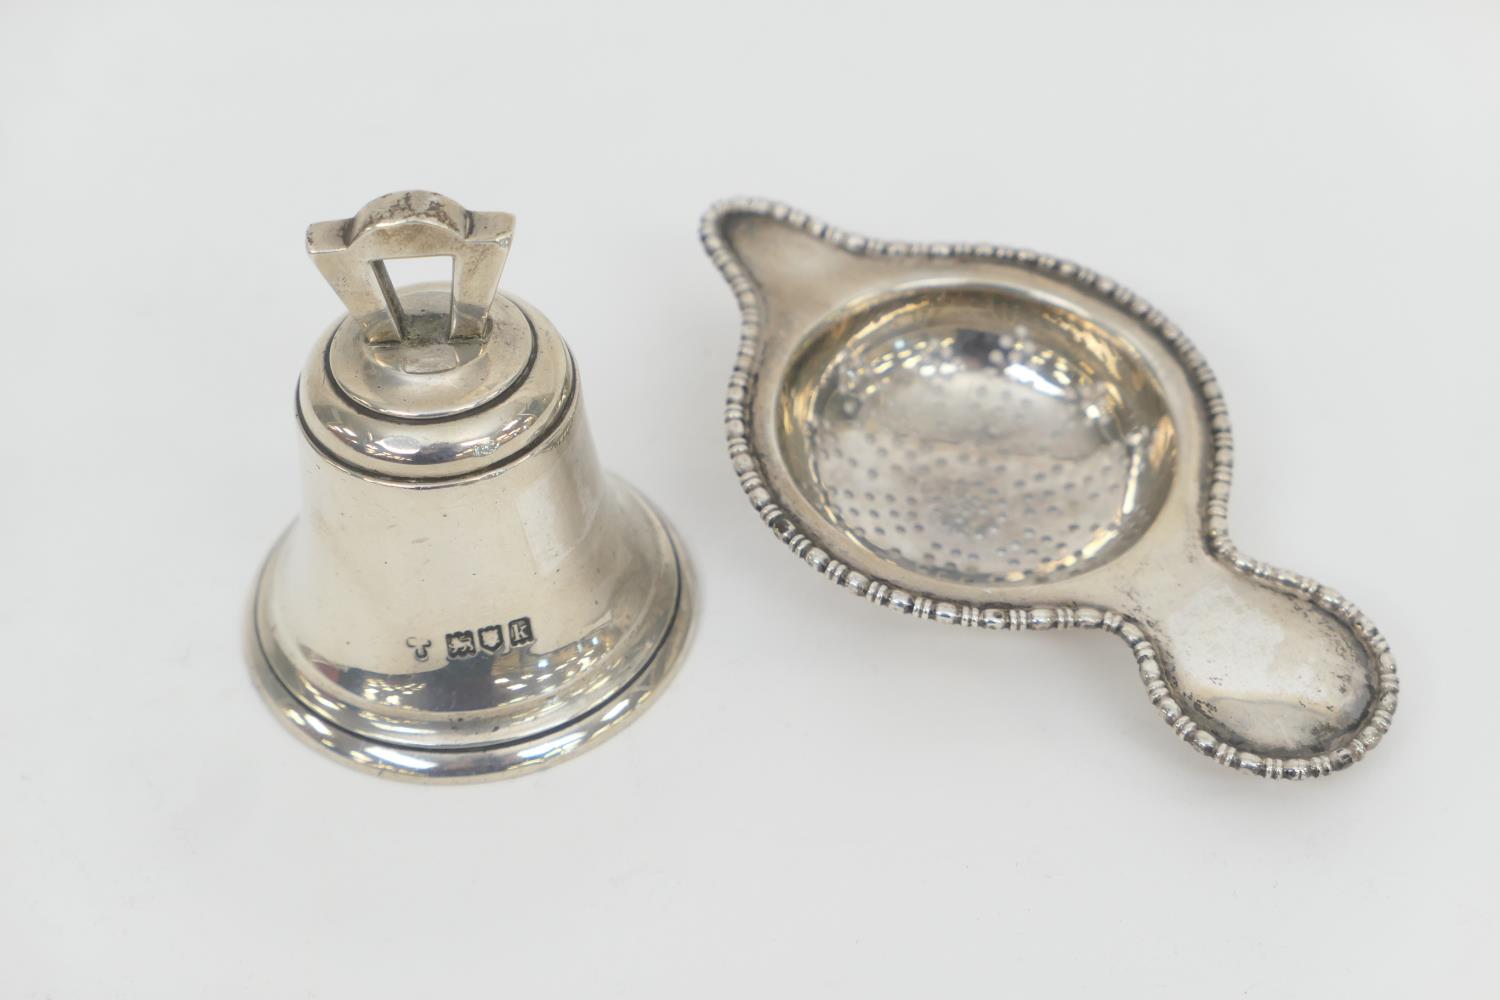 Edwardian silver table bell, London 1905 (clapper deficient), height 8cm, weight approx. 195g;